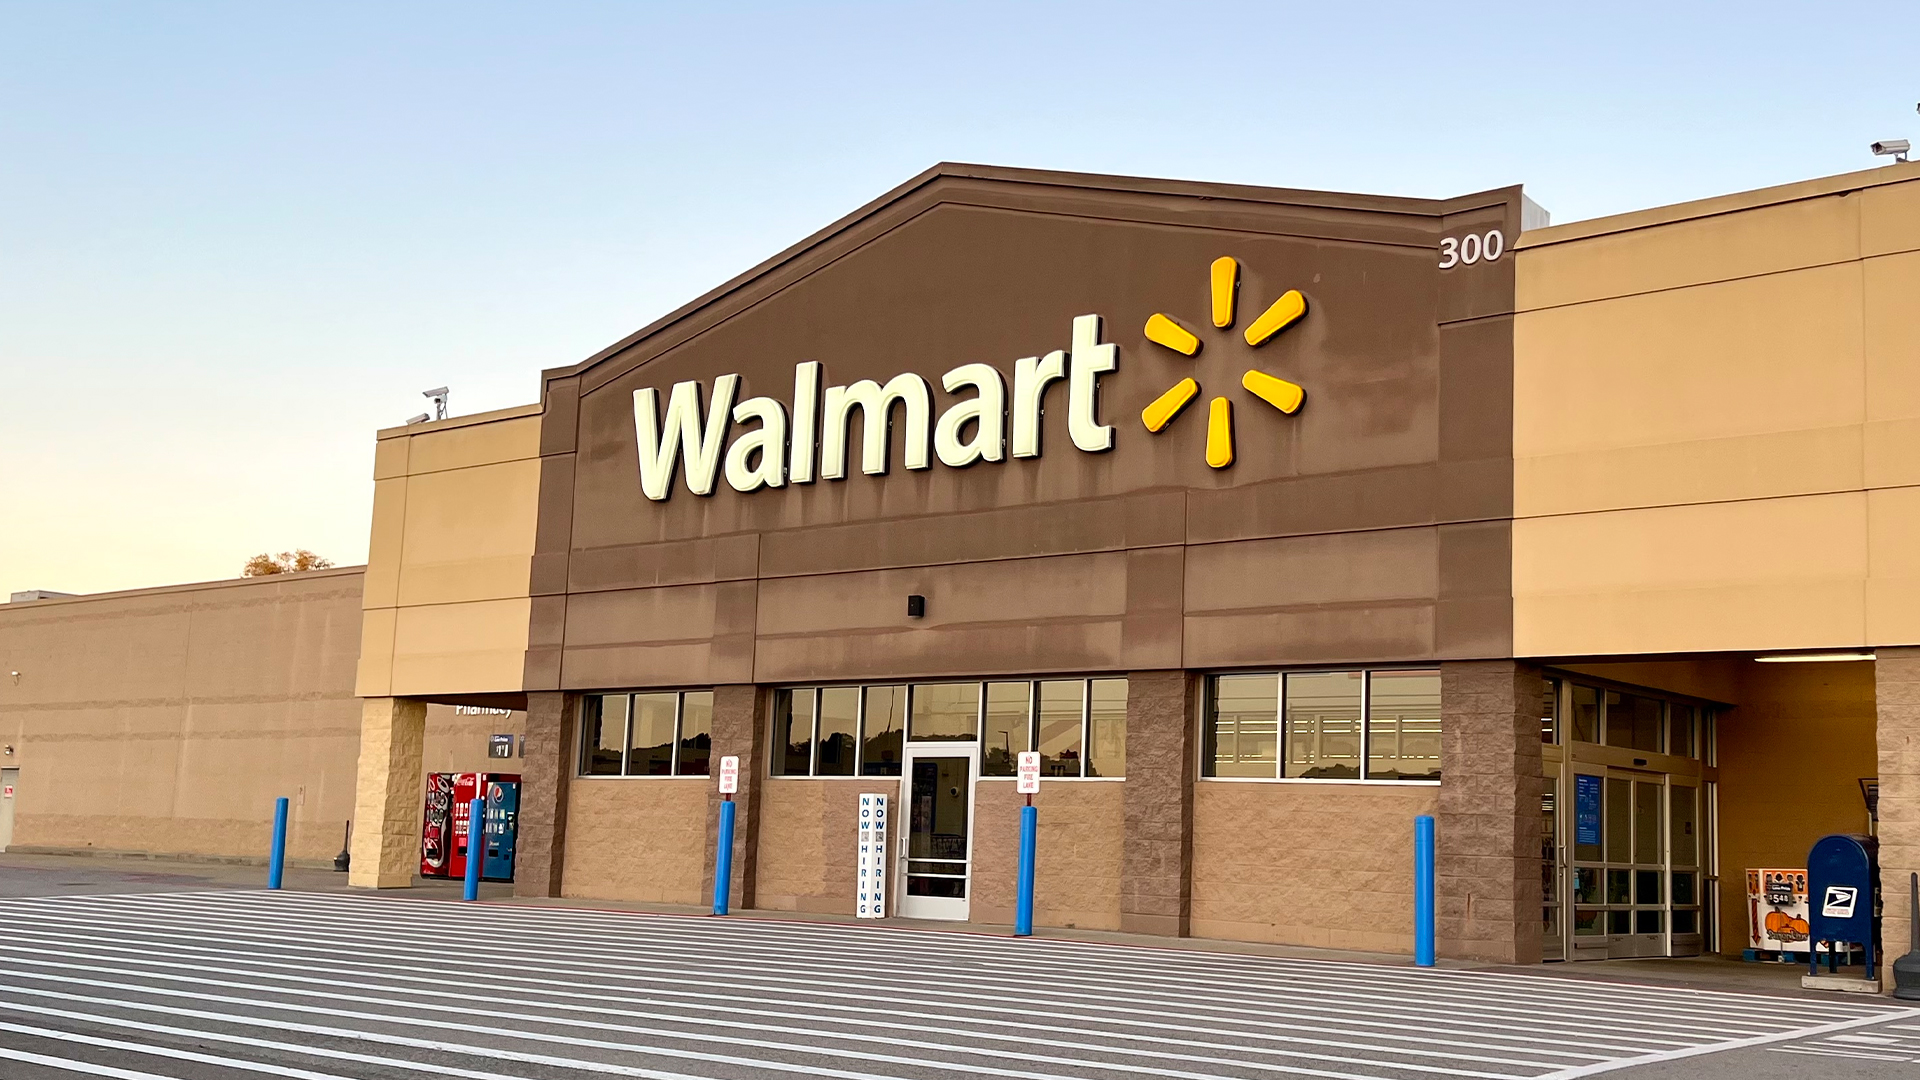 ‘What has the world come to?’ Walmart shoppers cry after pens & energy drinks locked – as chain walks back self-checkout [Video]